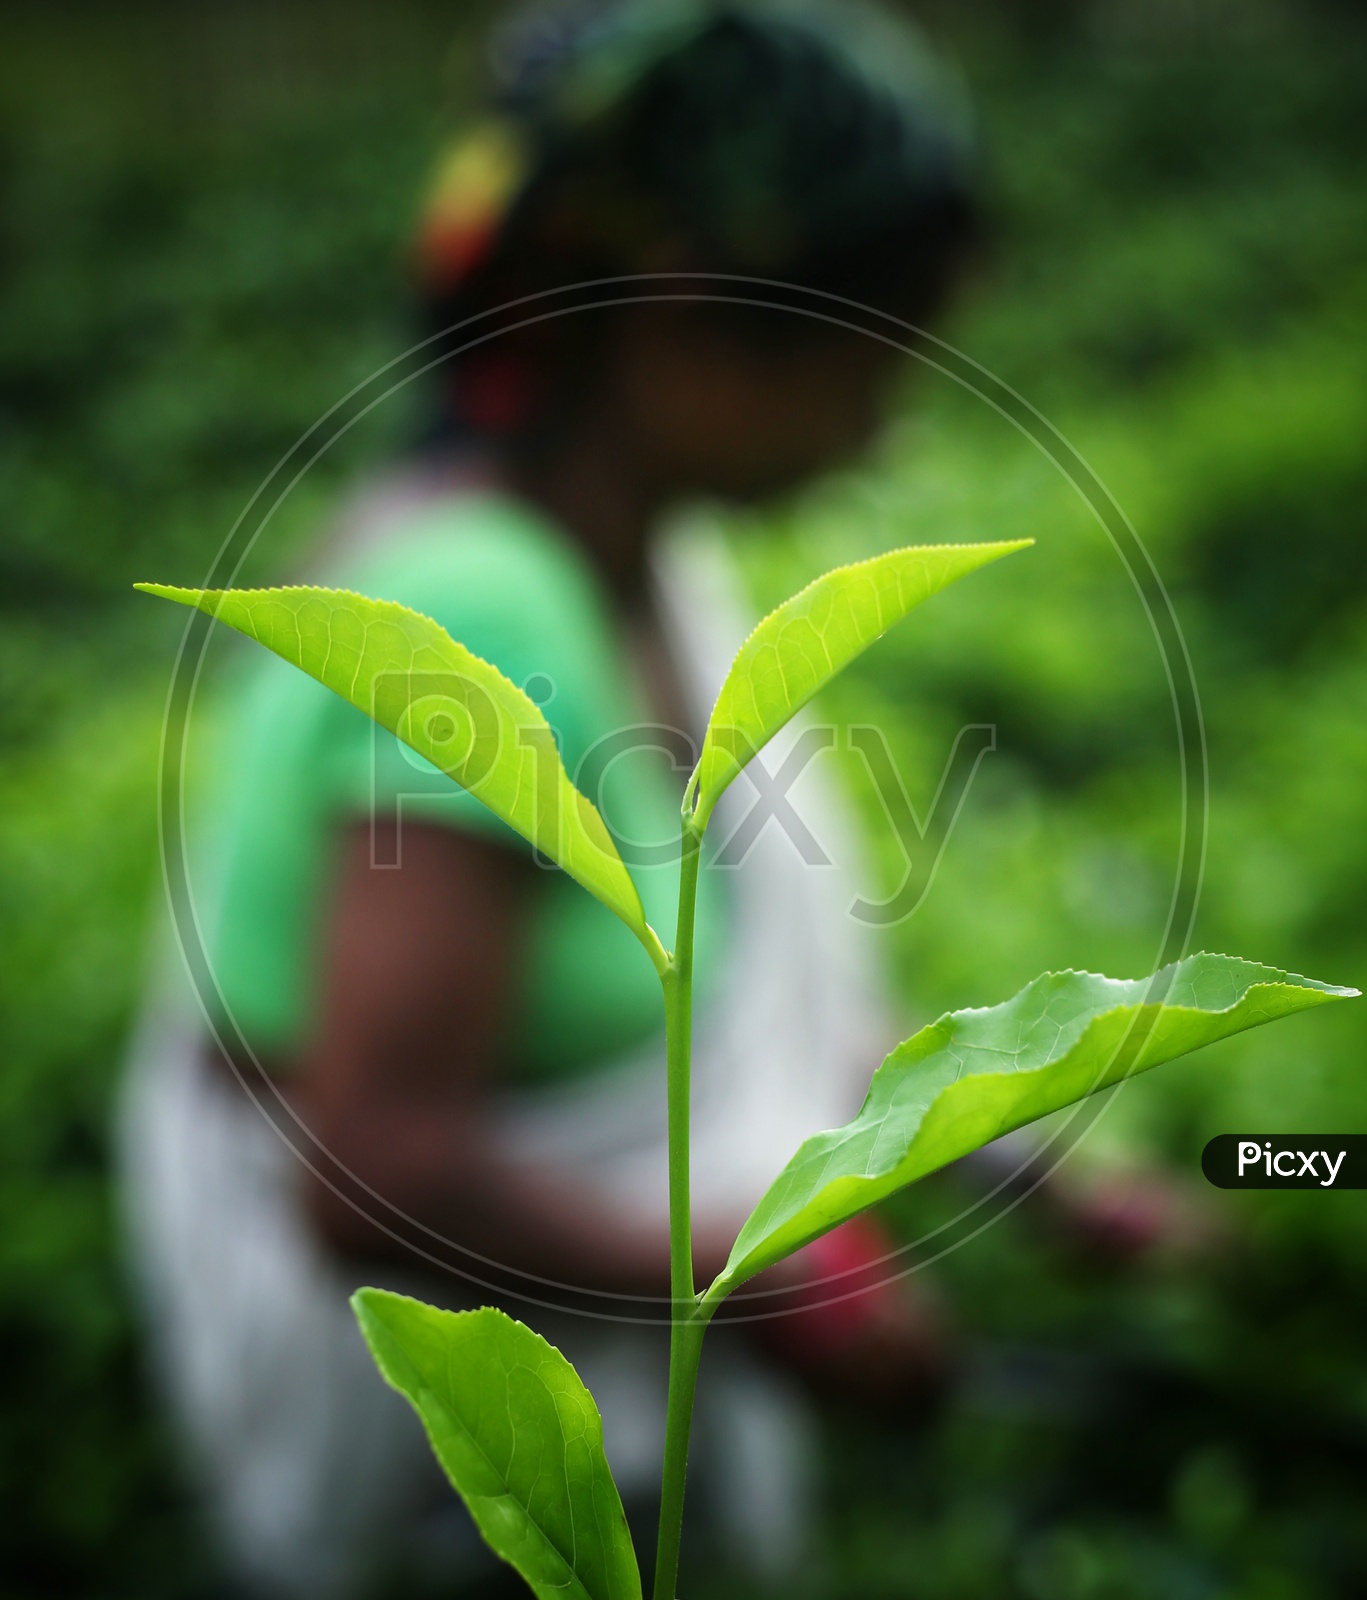 Tea leafs On A Plant In a Tea Plantation Closeup With a Tea Plantation Woman Worker In Background As Bokeh